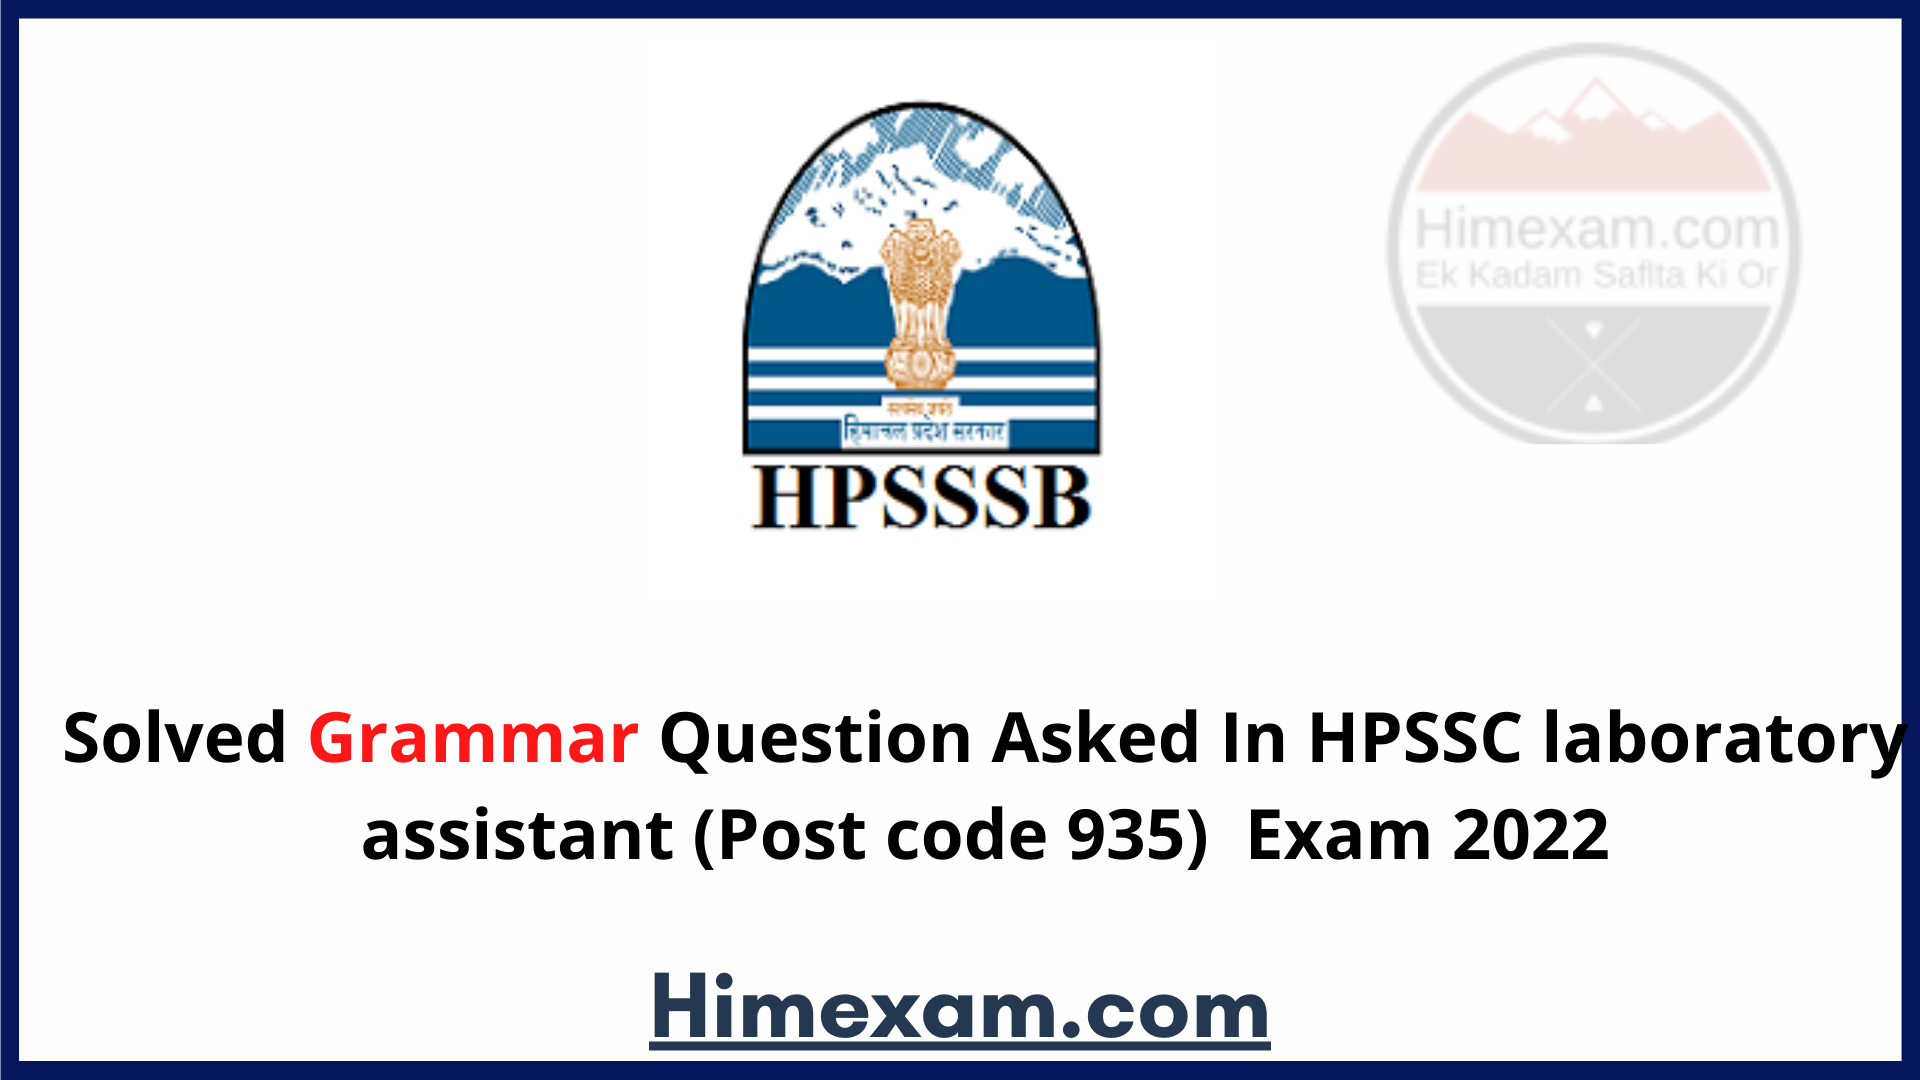 Solved Grammar Question Asked In HPSSC laboratory assistant (Post code 935)  Exam 2022